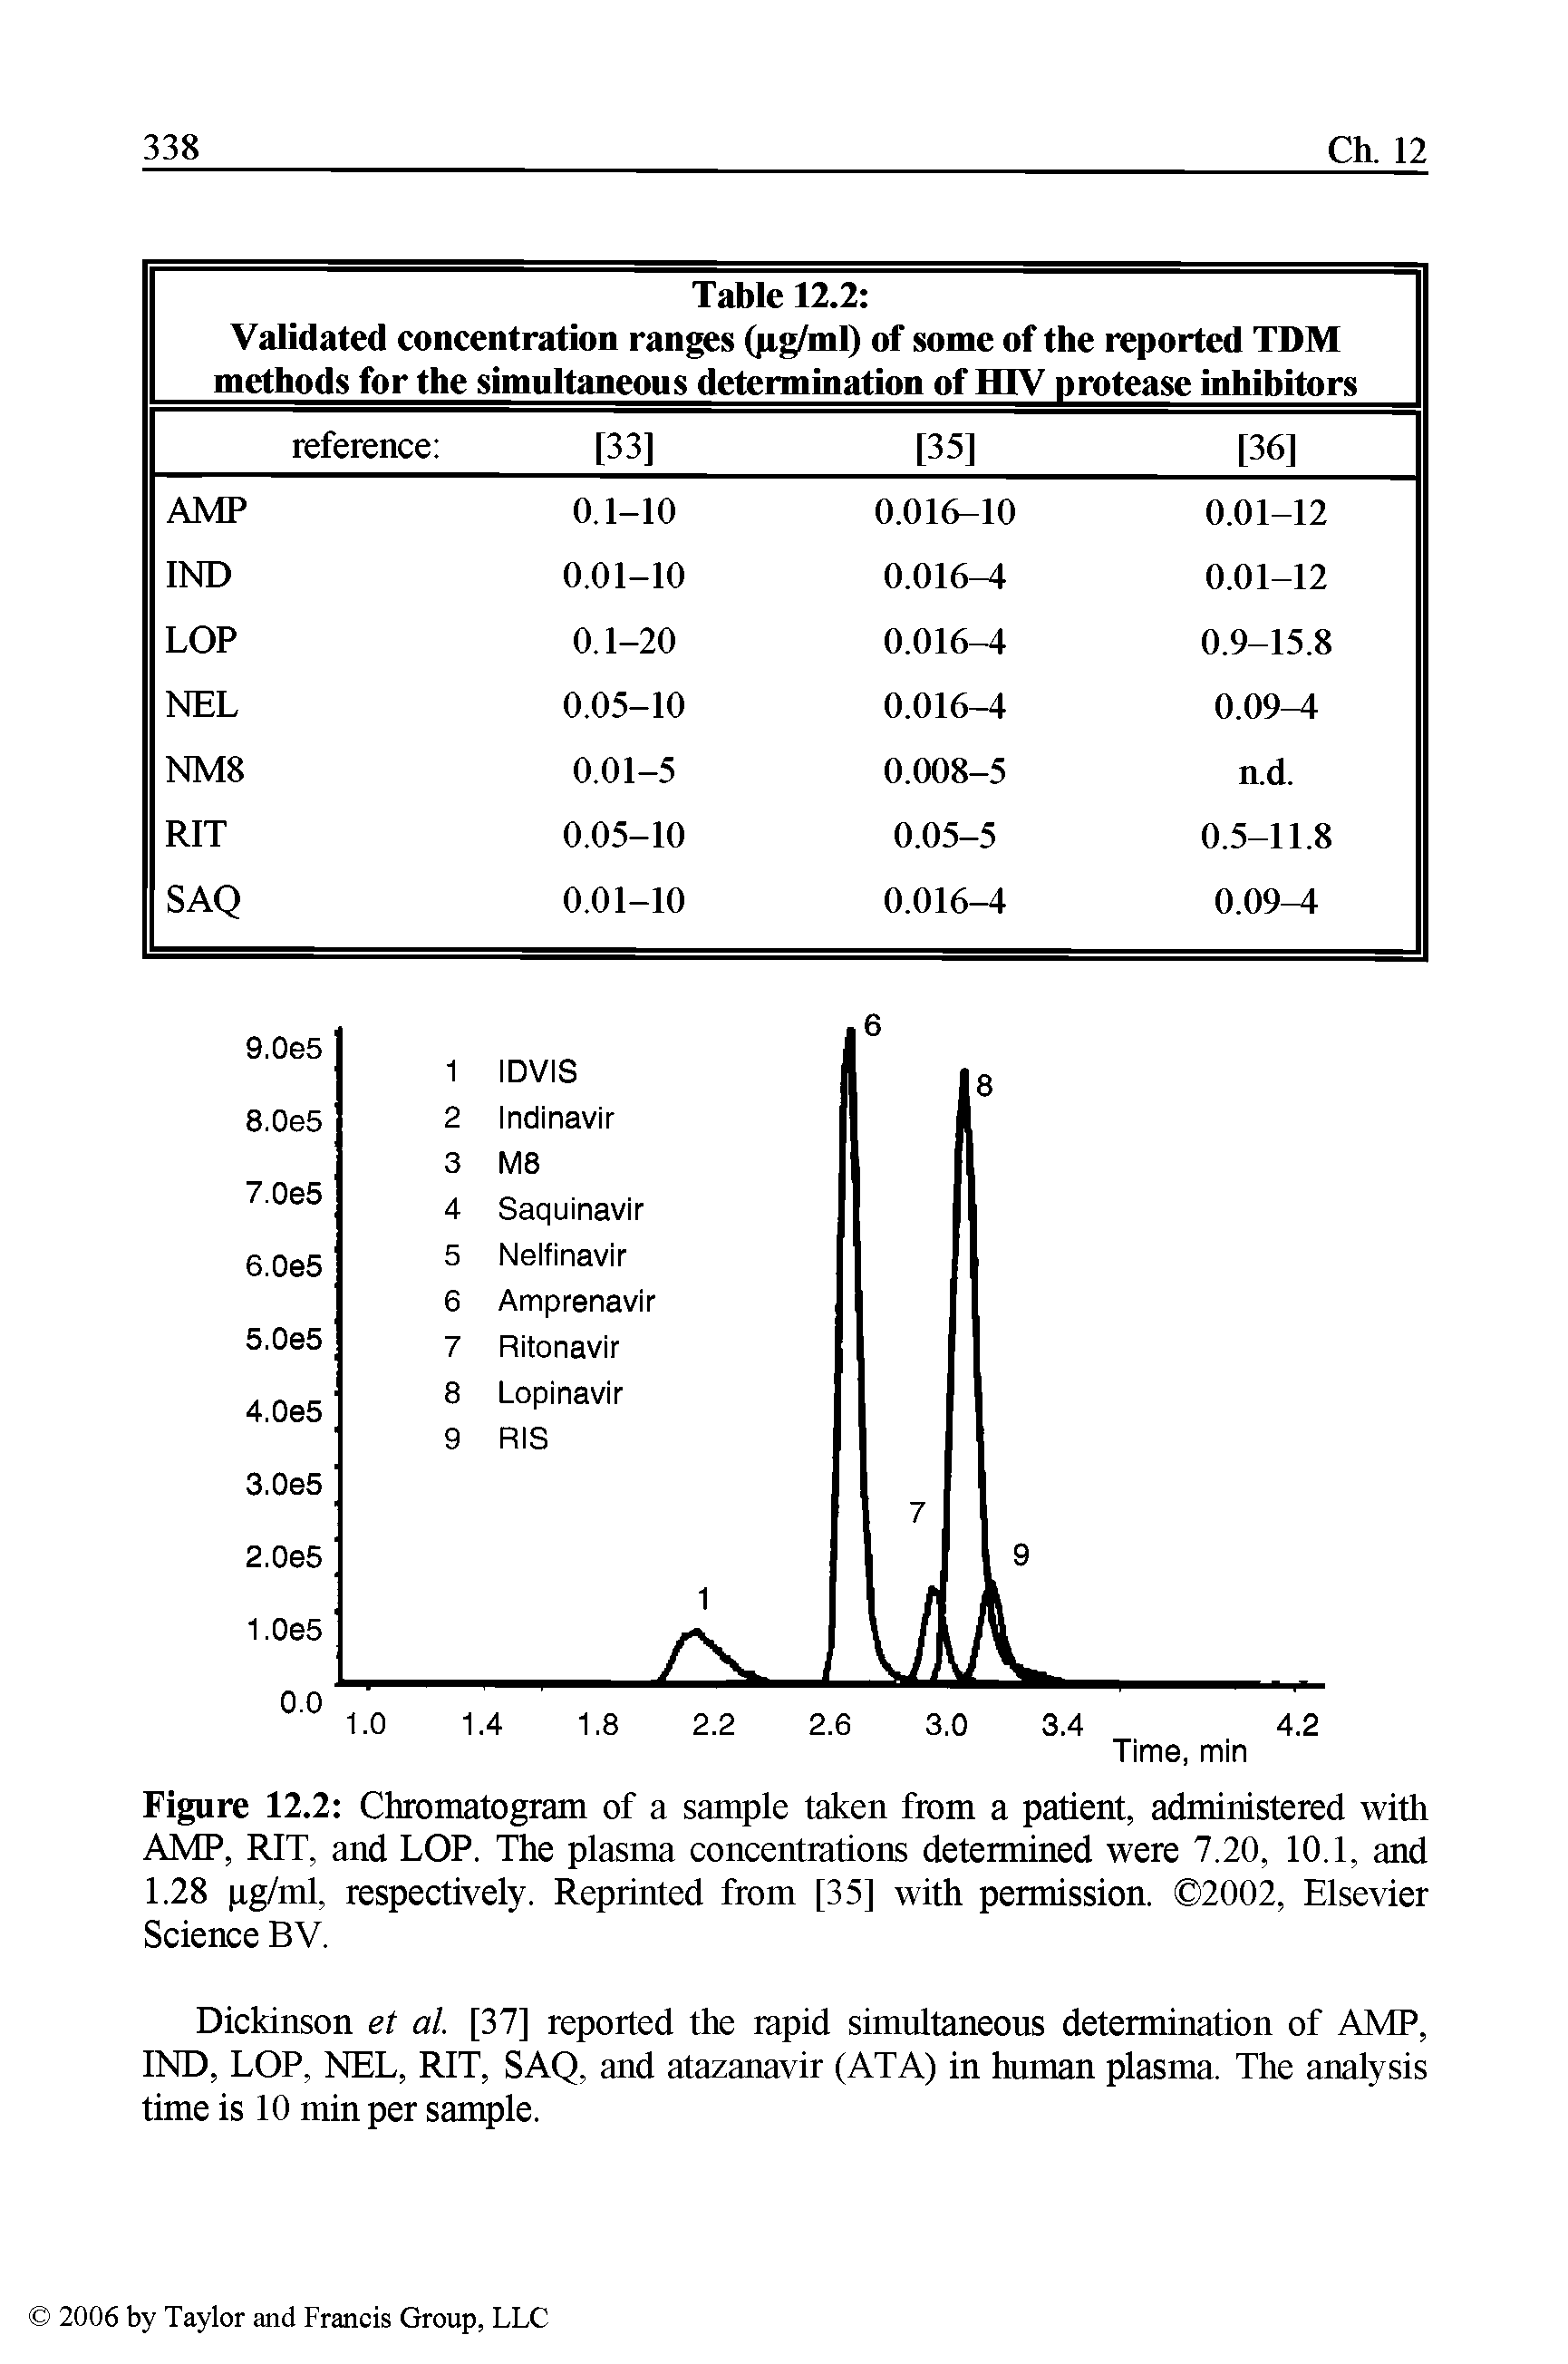 Figure 12.2 Chromatogram of a sample taken from a patient, administered with AMP, RIT, and LOP. The plasma concentrations determined were 7.20, 10.1, and 1.28 pg/ml, respectively. Reprinted from [35] with permission. 2002, Elsevier Science BV.